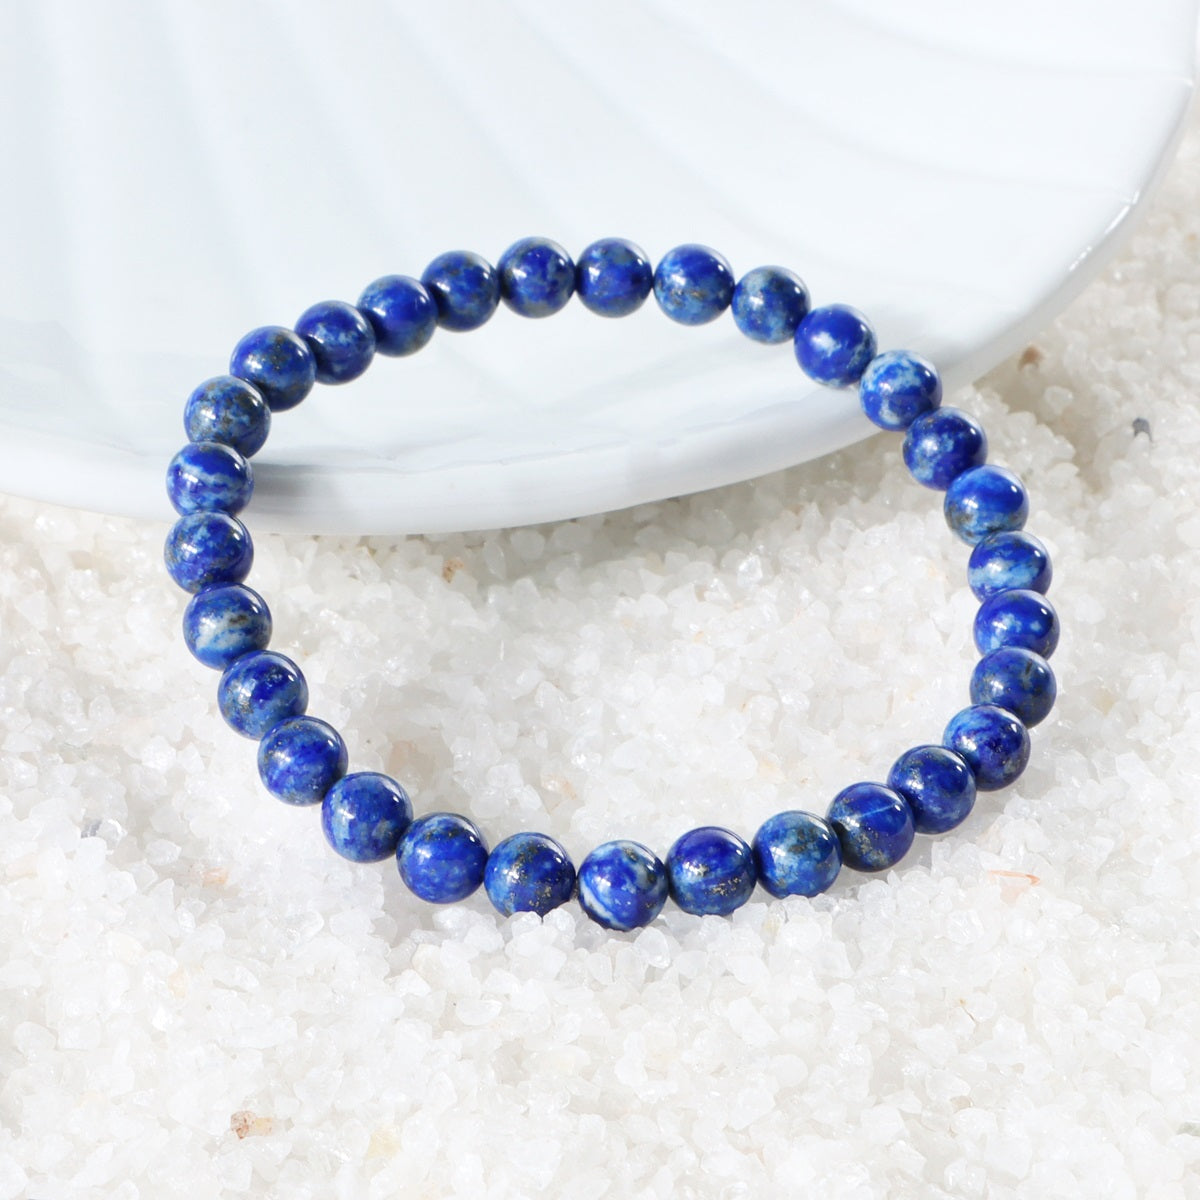 Various styling ideas for the Lapis Lazuli Stretch Bracelet, showcasing its versatile and fashionable appeal for everyday wear